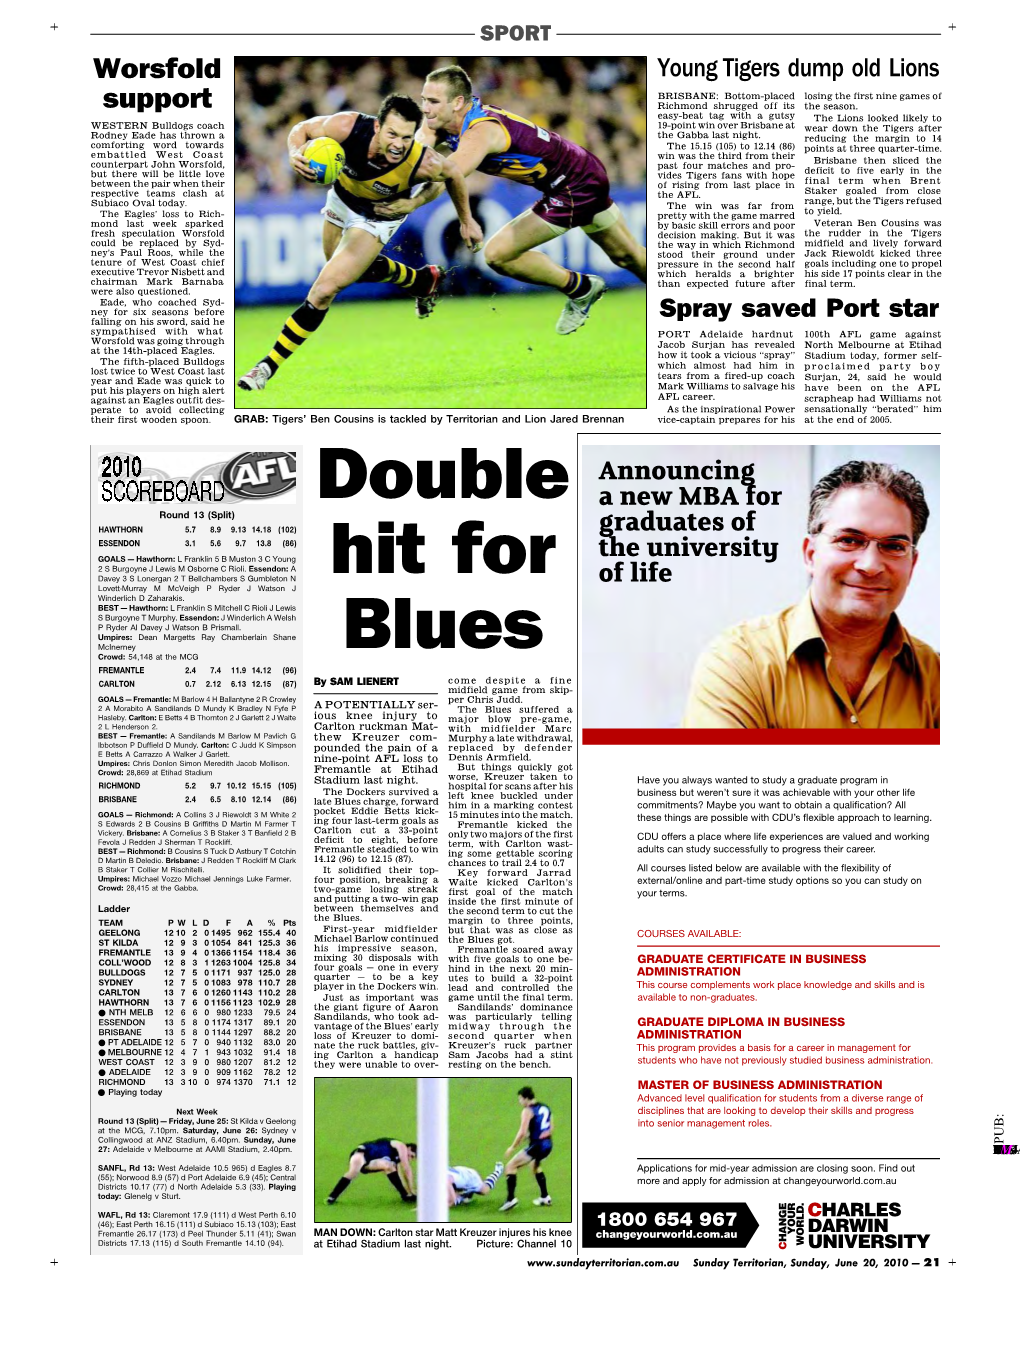 Double Hit for Blues